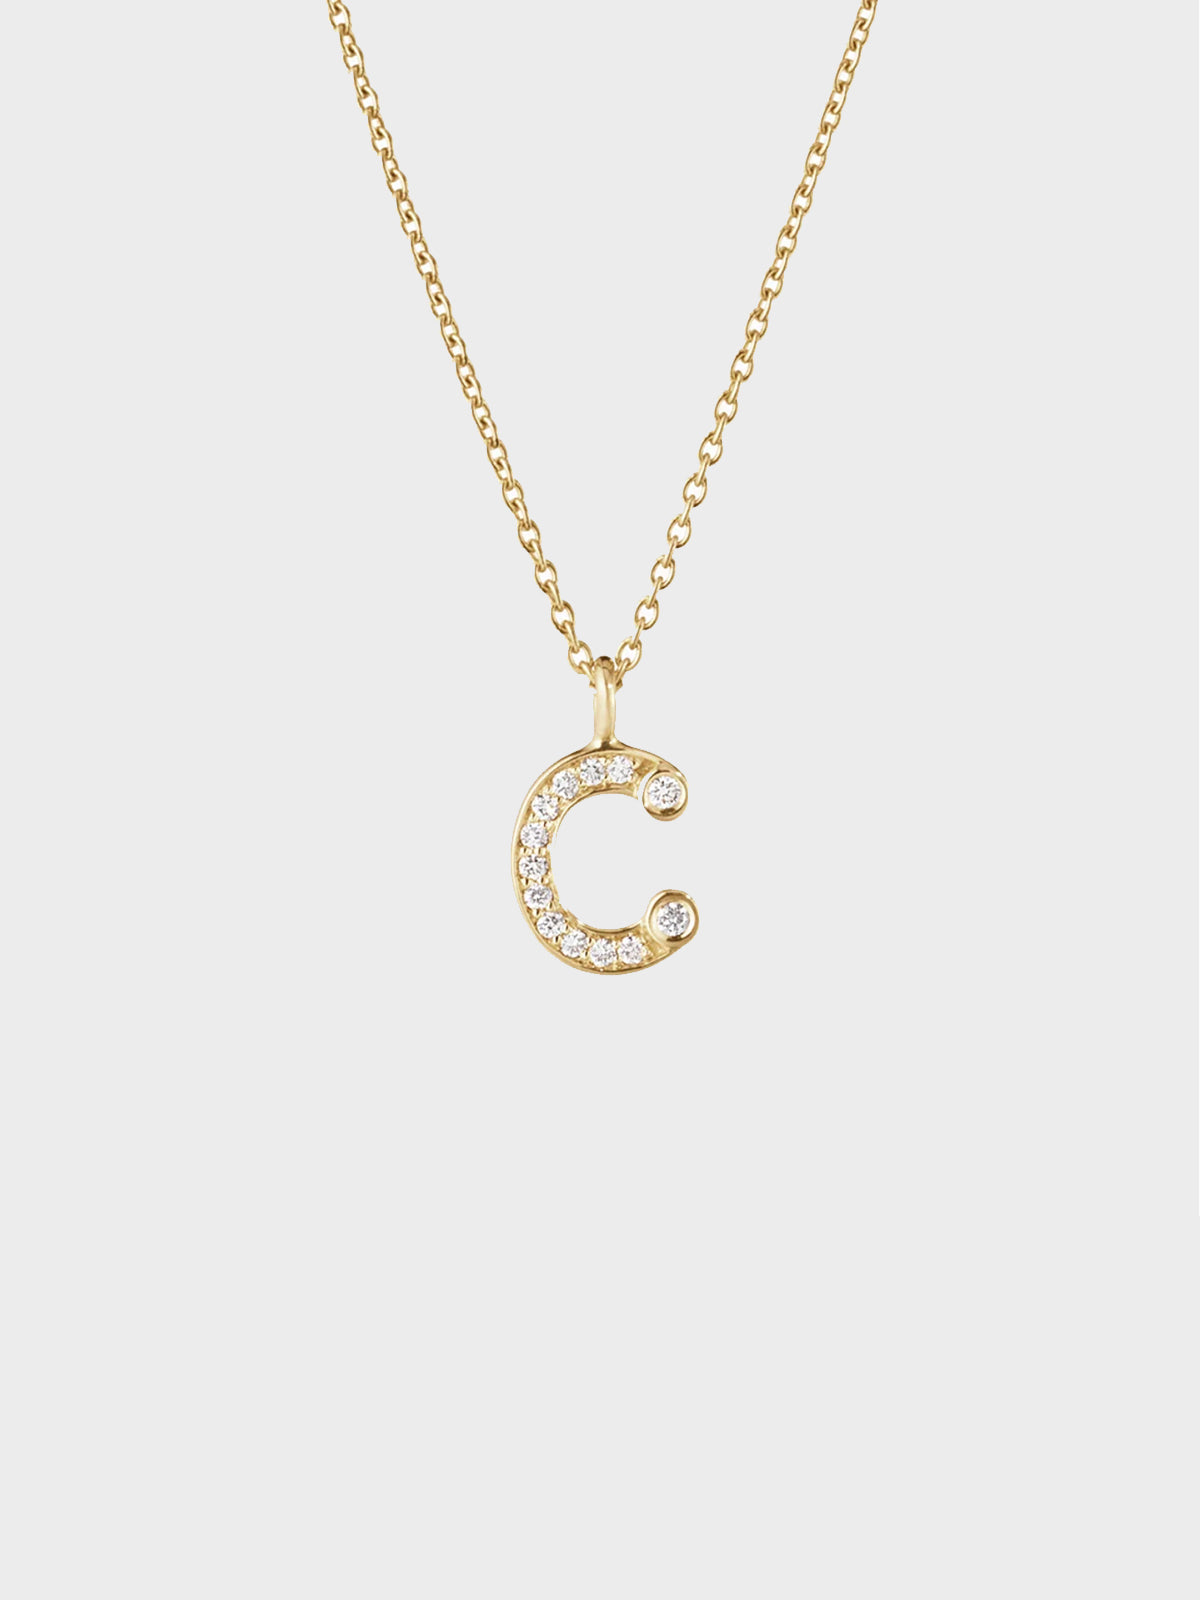 Sophie Bille Brahe - Simple C Necklace in 18K Yellow Gold